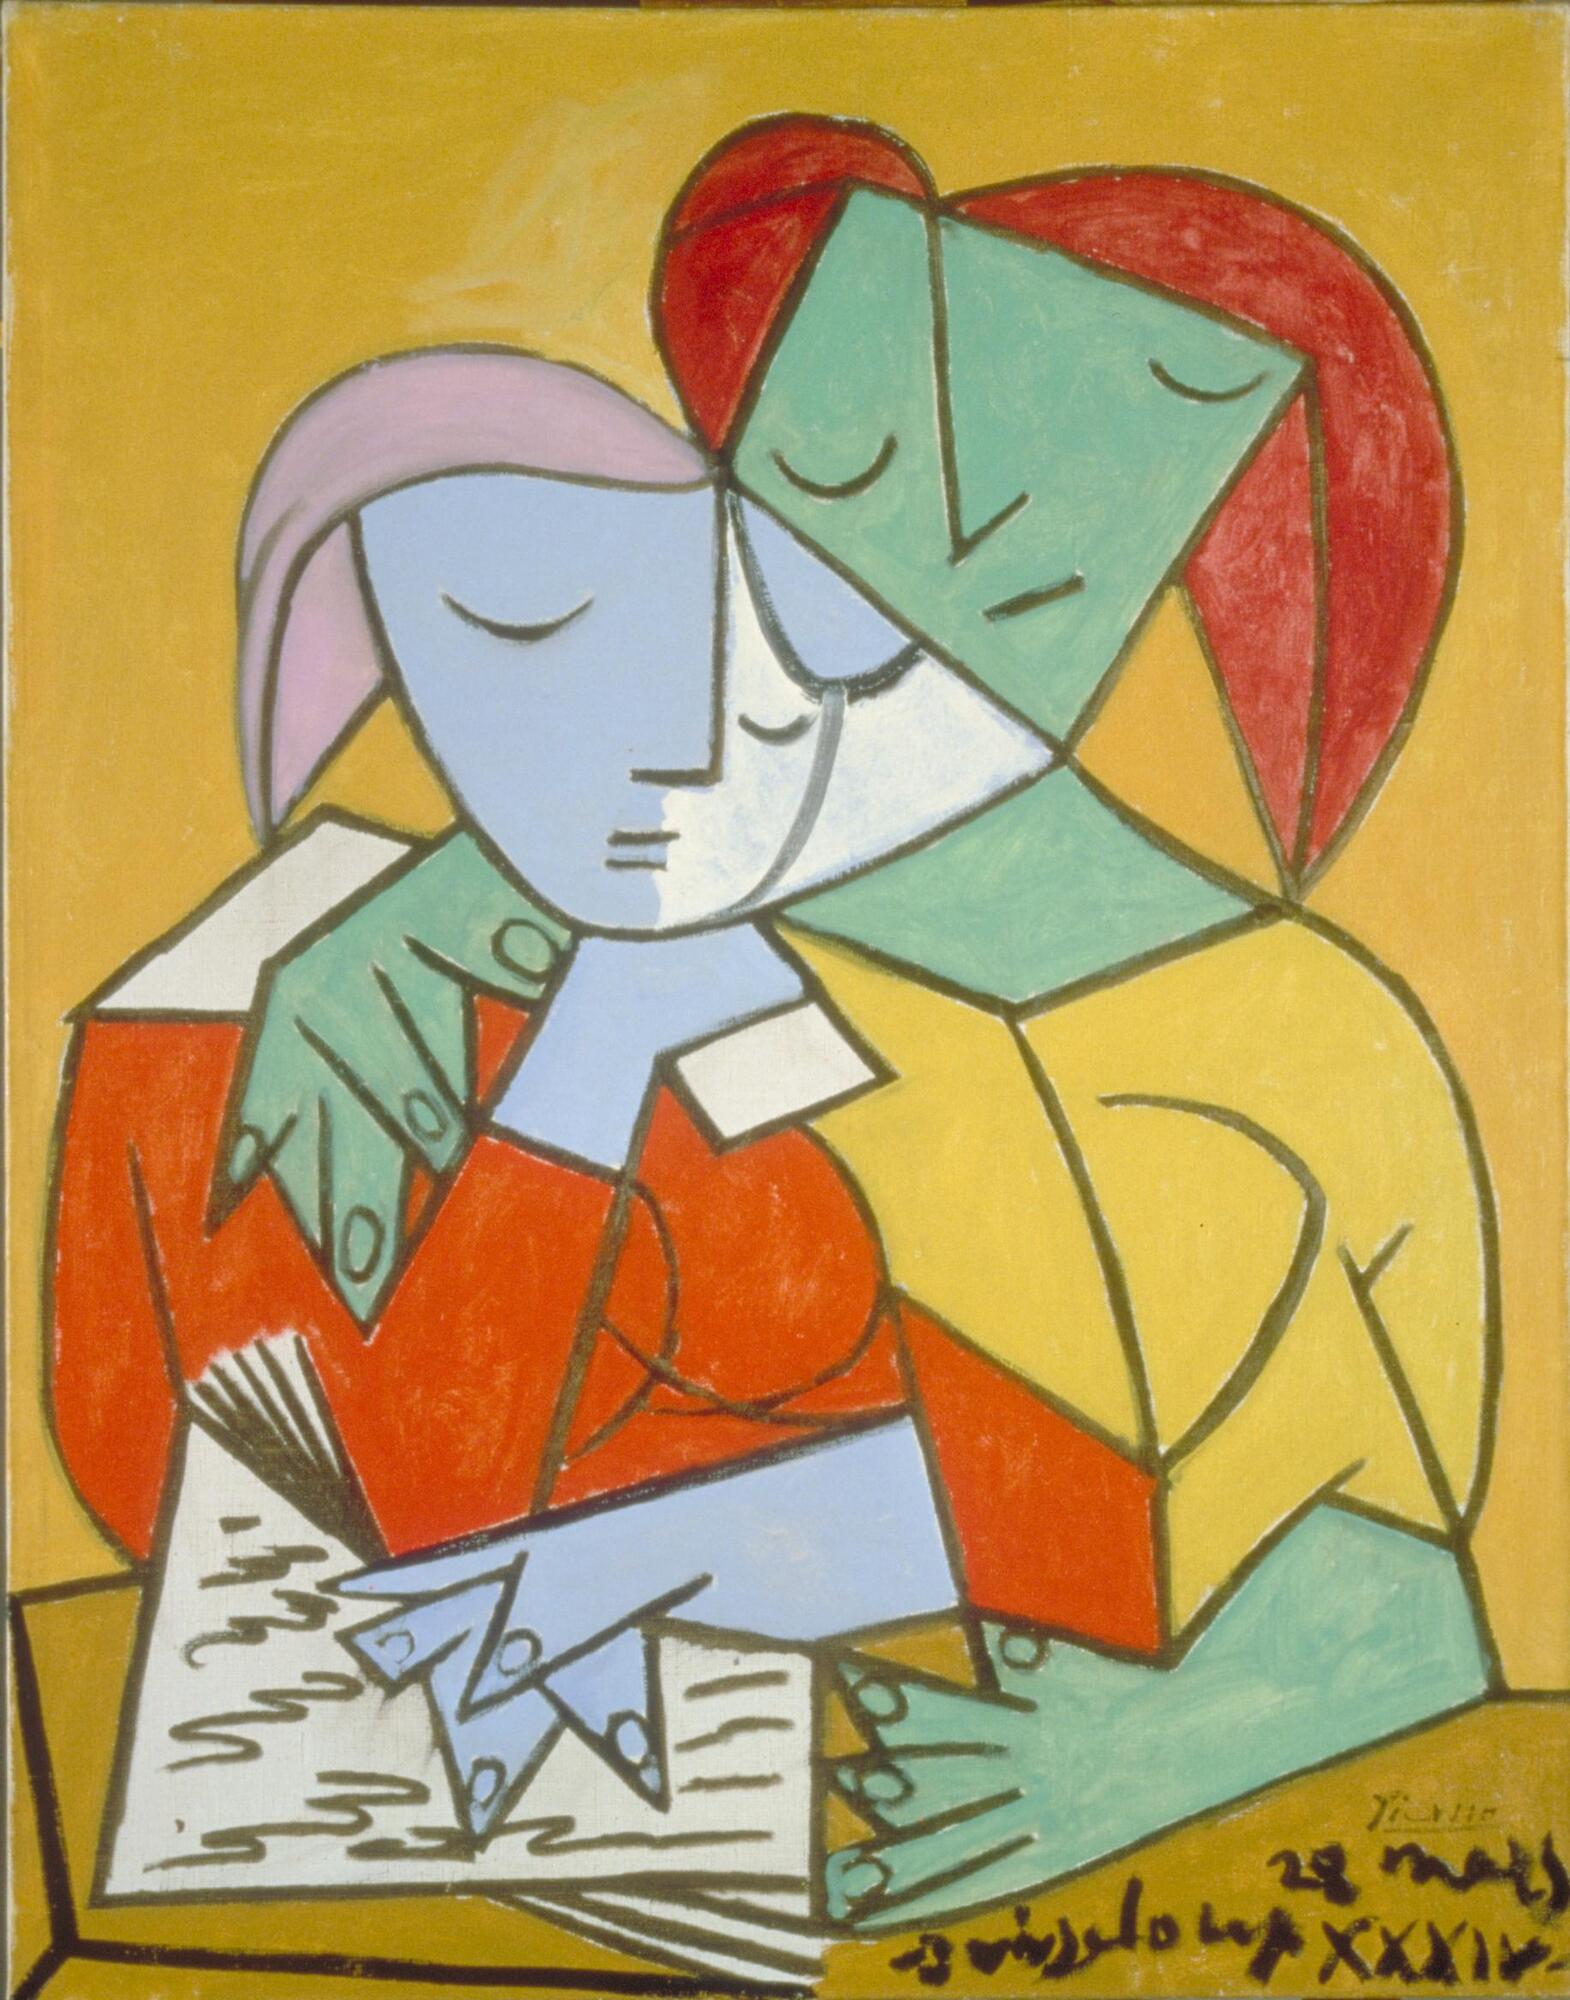 Two girls, depicted in bold geometric shapes and block colors, reading a book together. The figure seated at viewer's right, slightly taller, is green and wearing yellow. The figure at viewer's left has a face of blue and white and is clothed in red resting her clasped hands upon an open book.